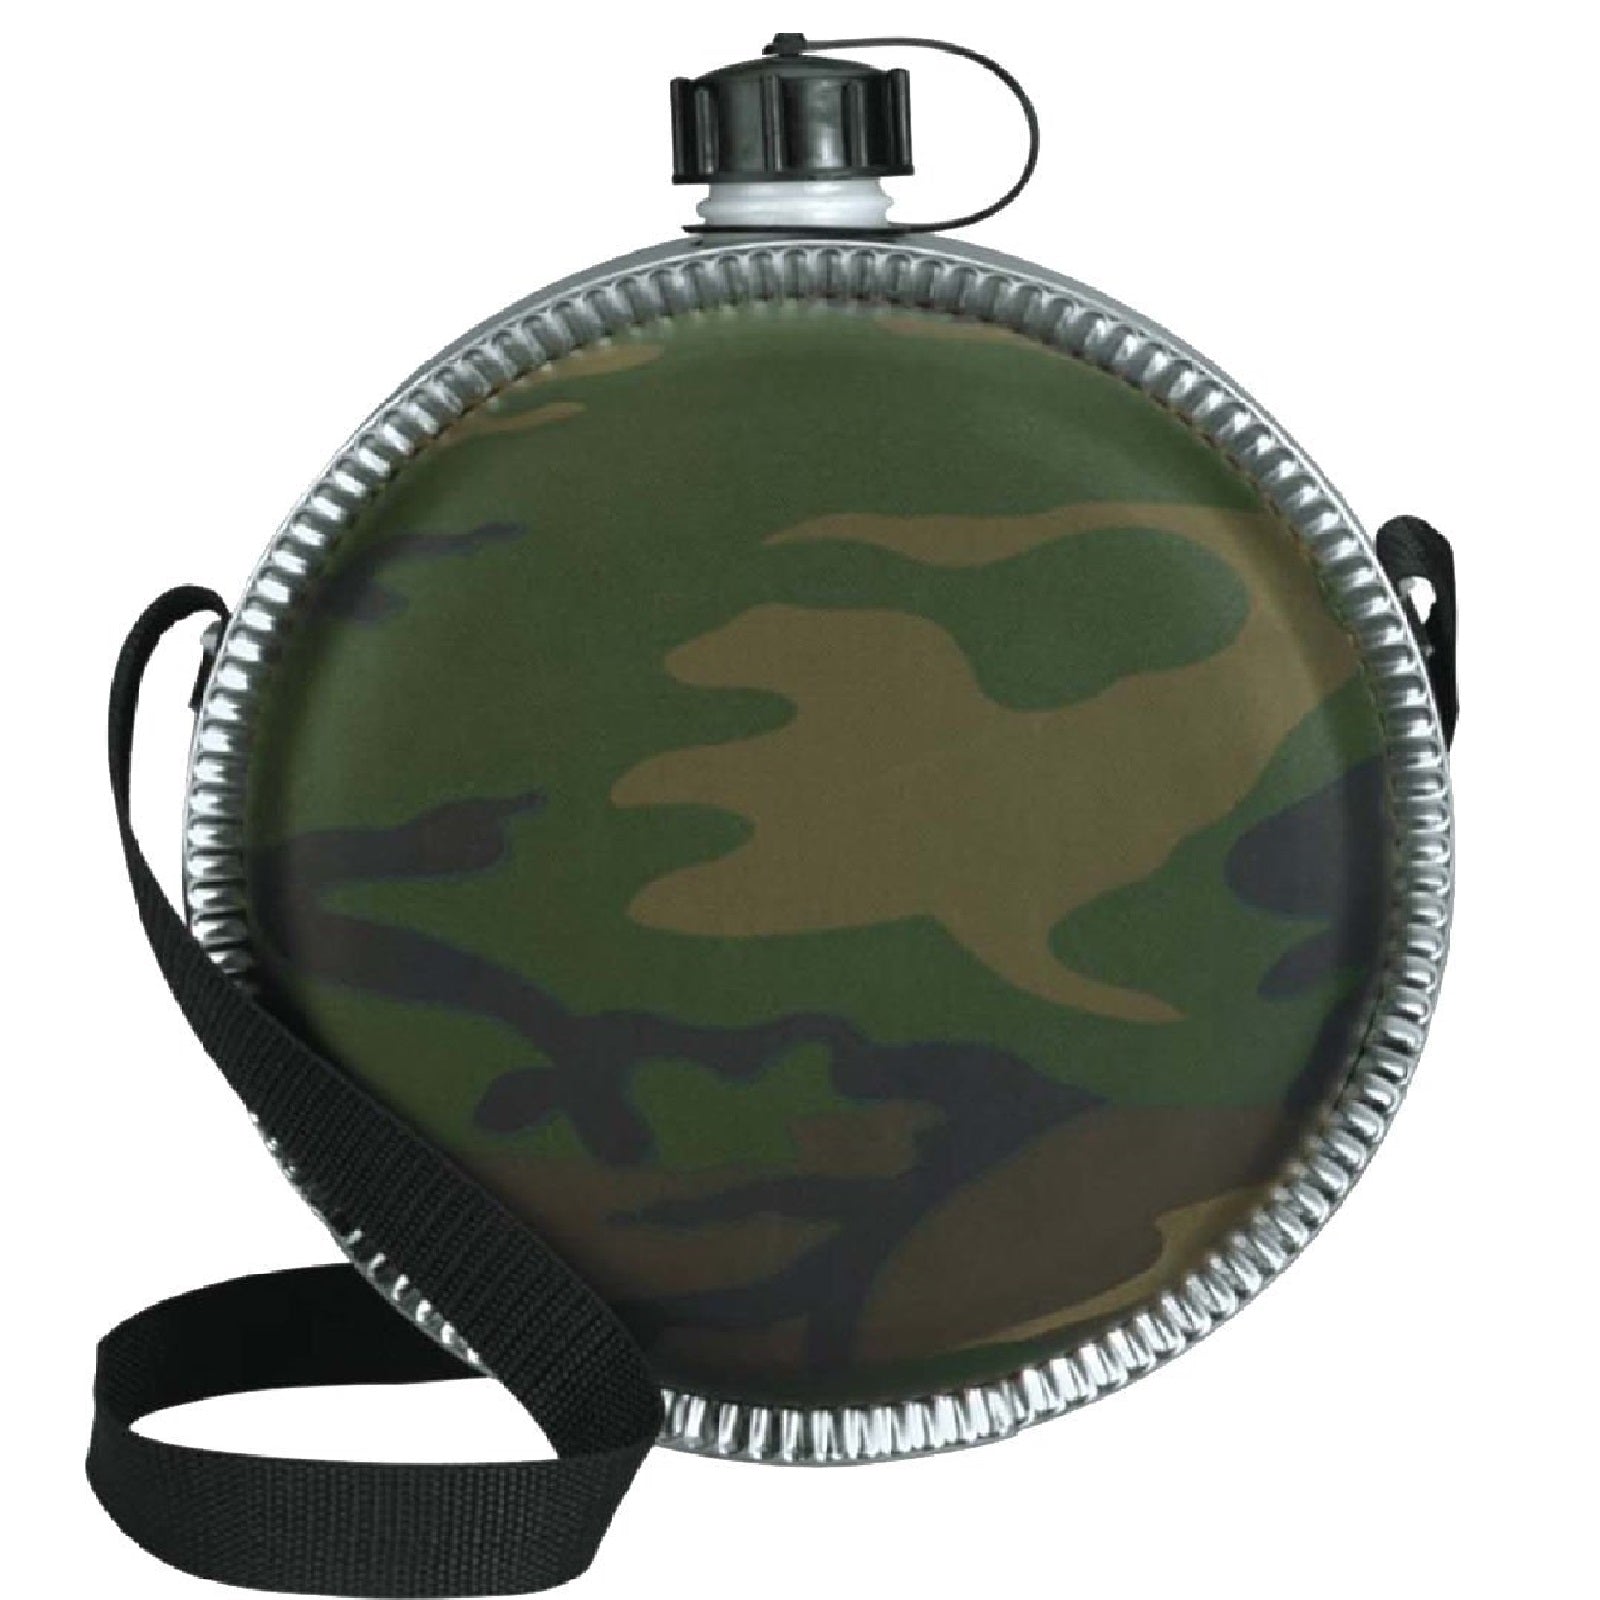 8 Cups Water Bottle - Canteen with Carrying Strap